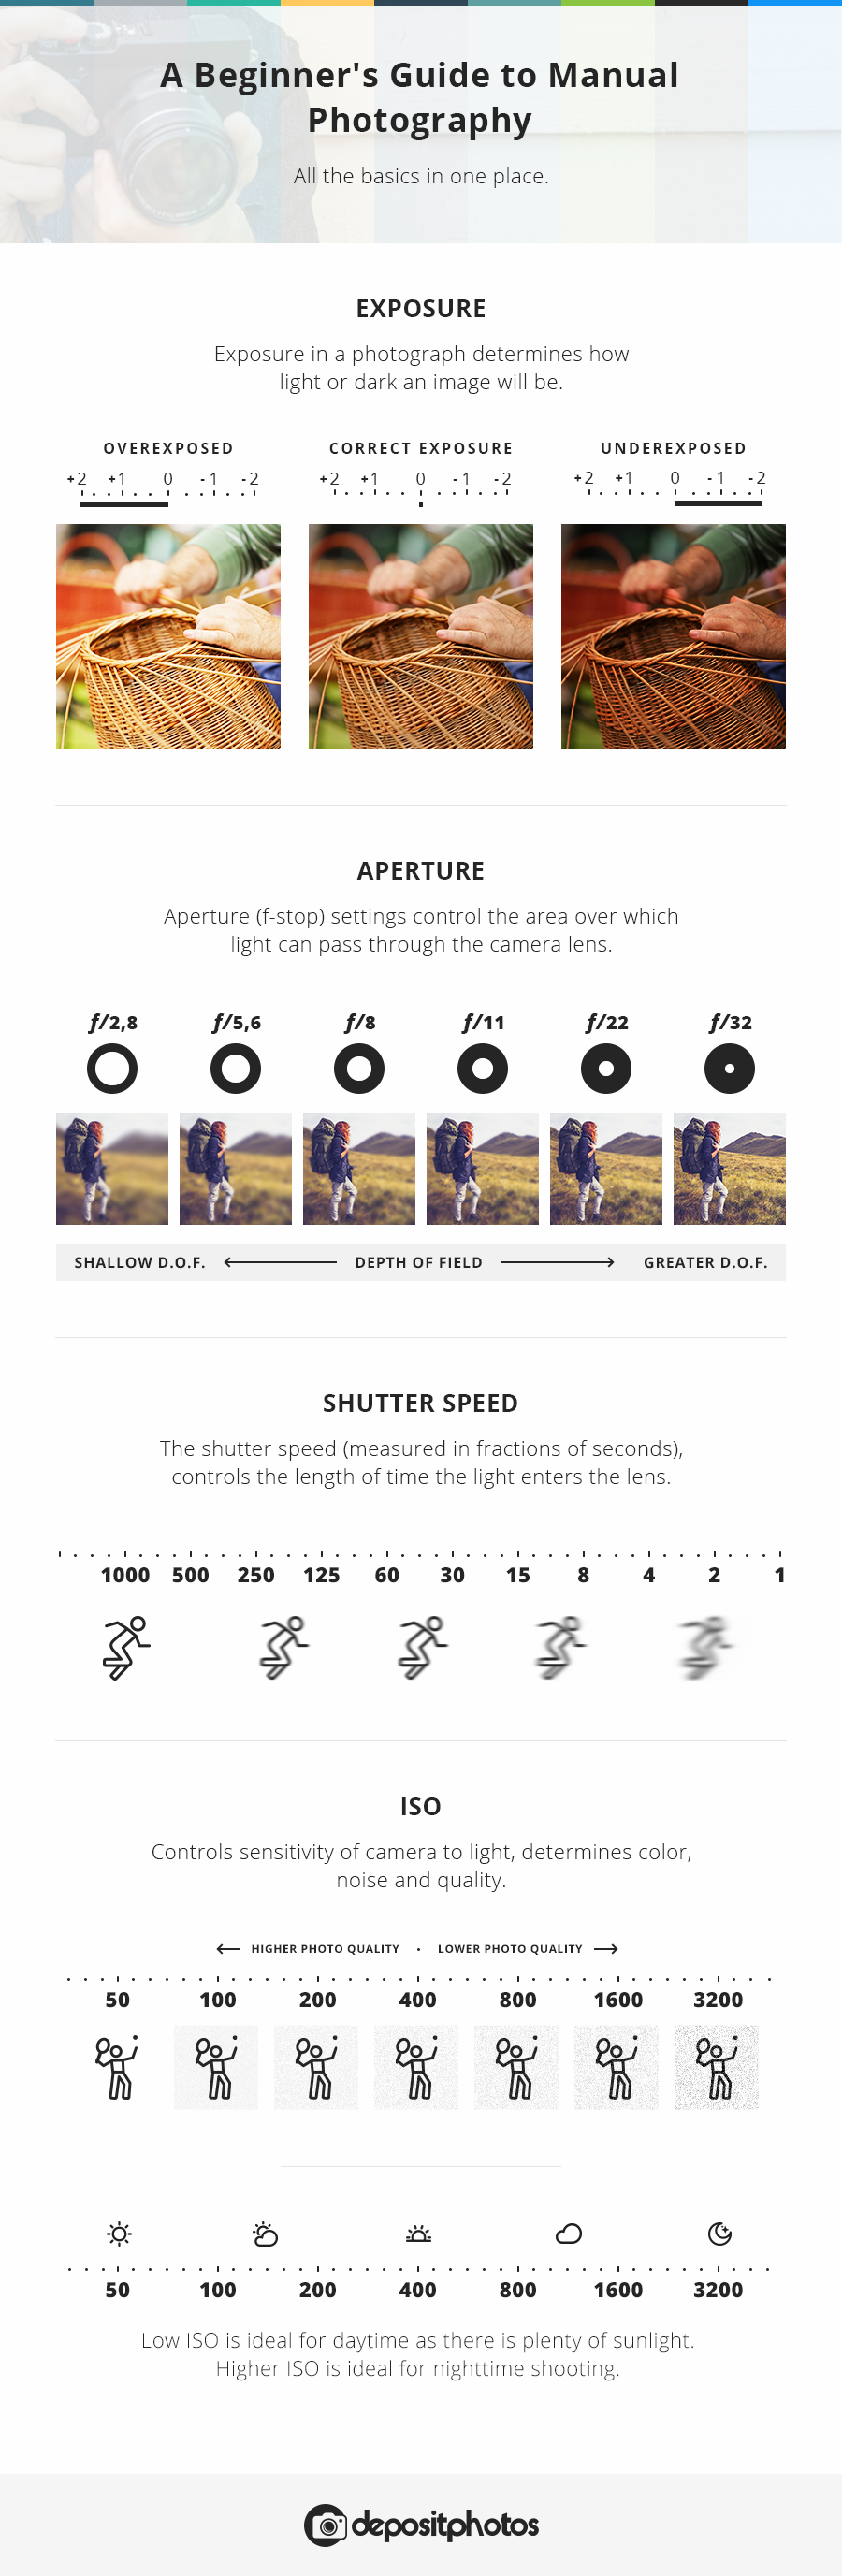 A Beginner’s Guide to Manual Photography - #Infographic